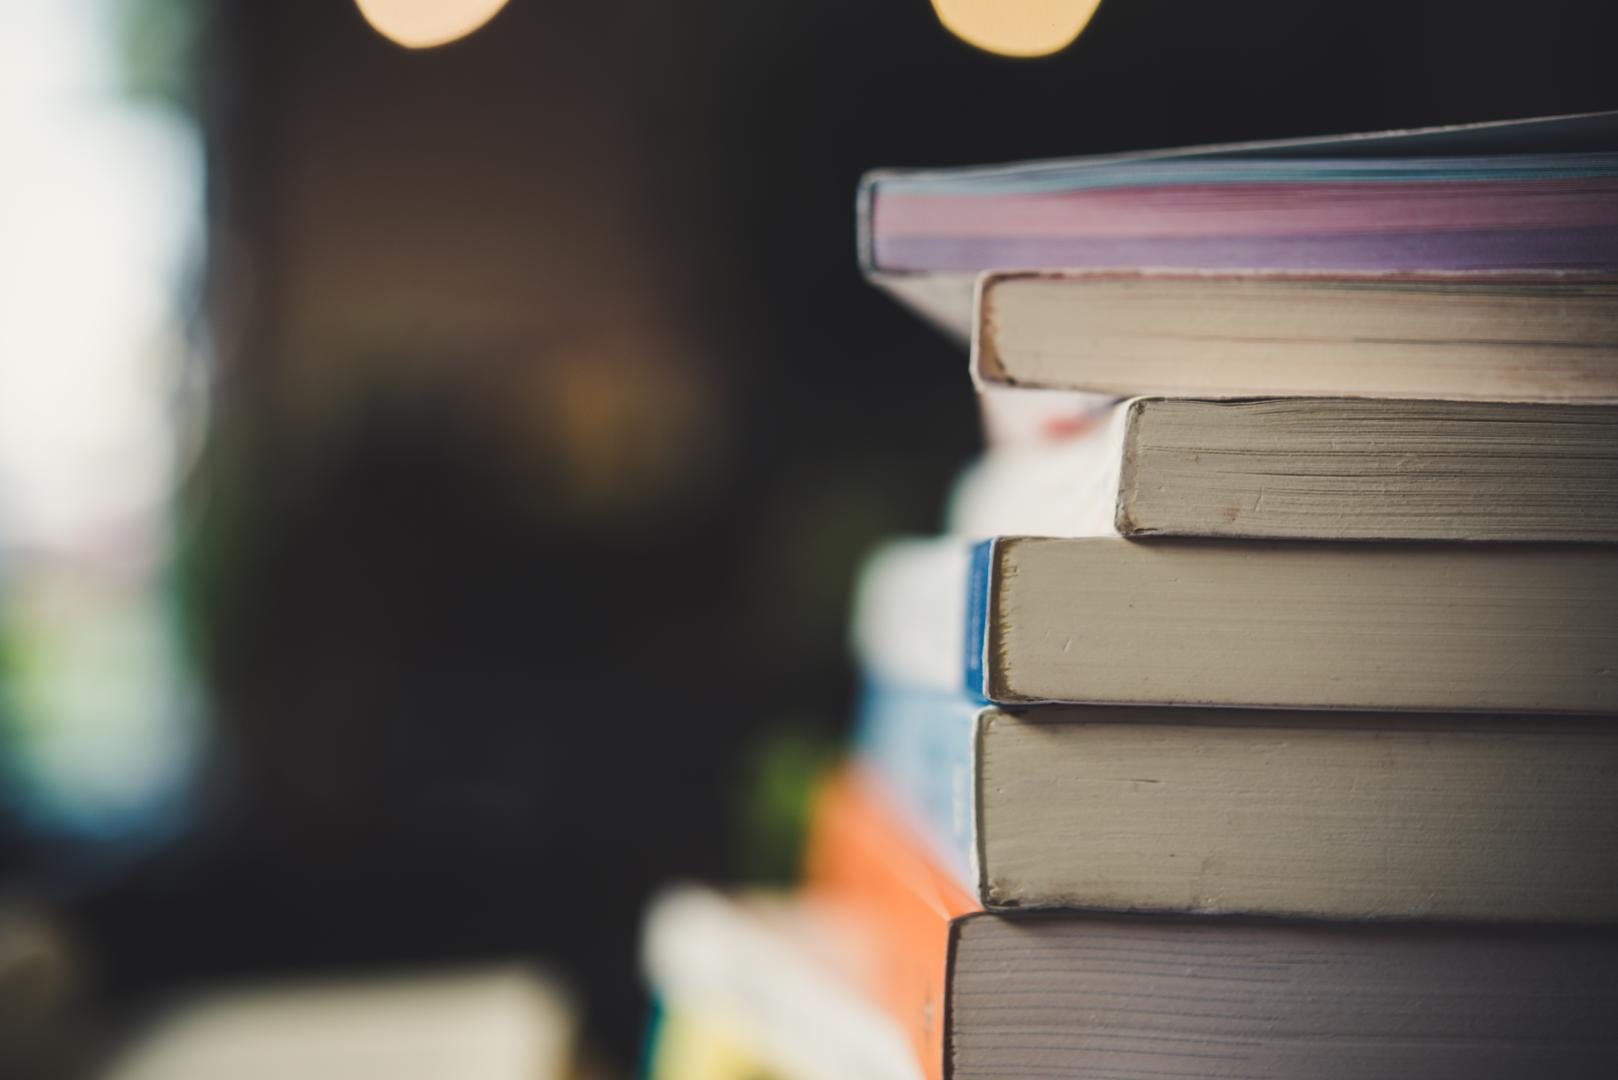 A photo of a pile of books against a background that is out of focus